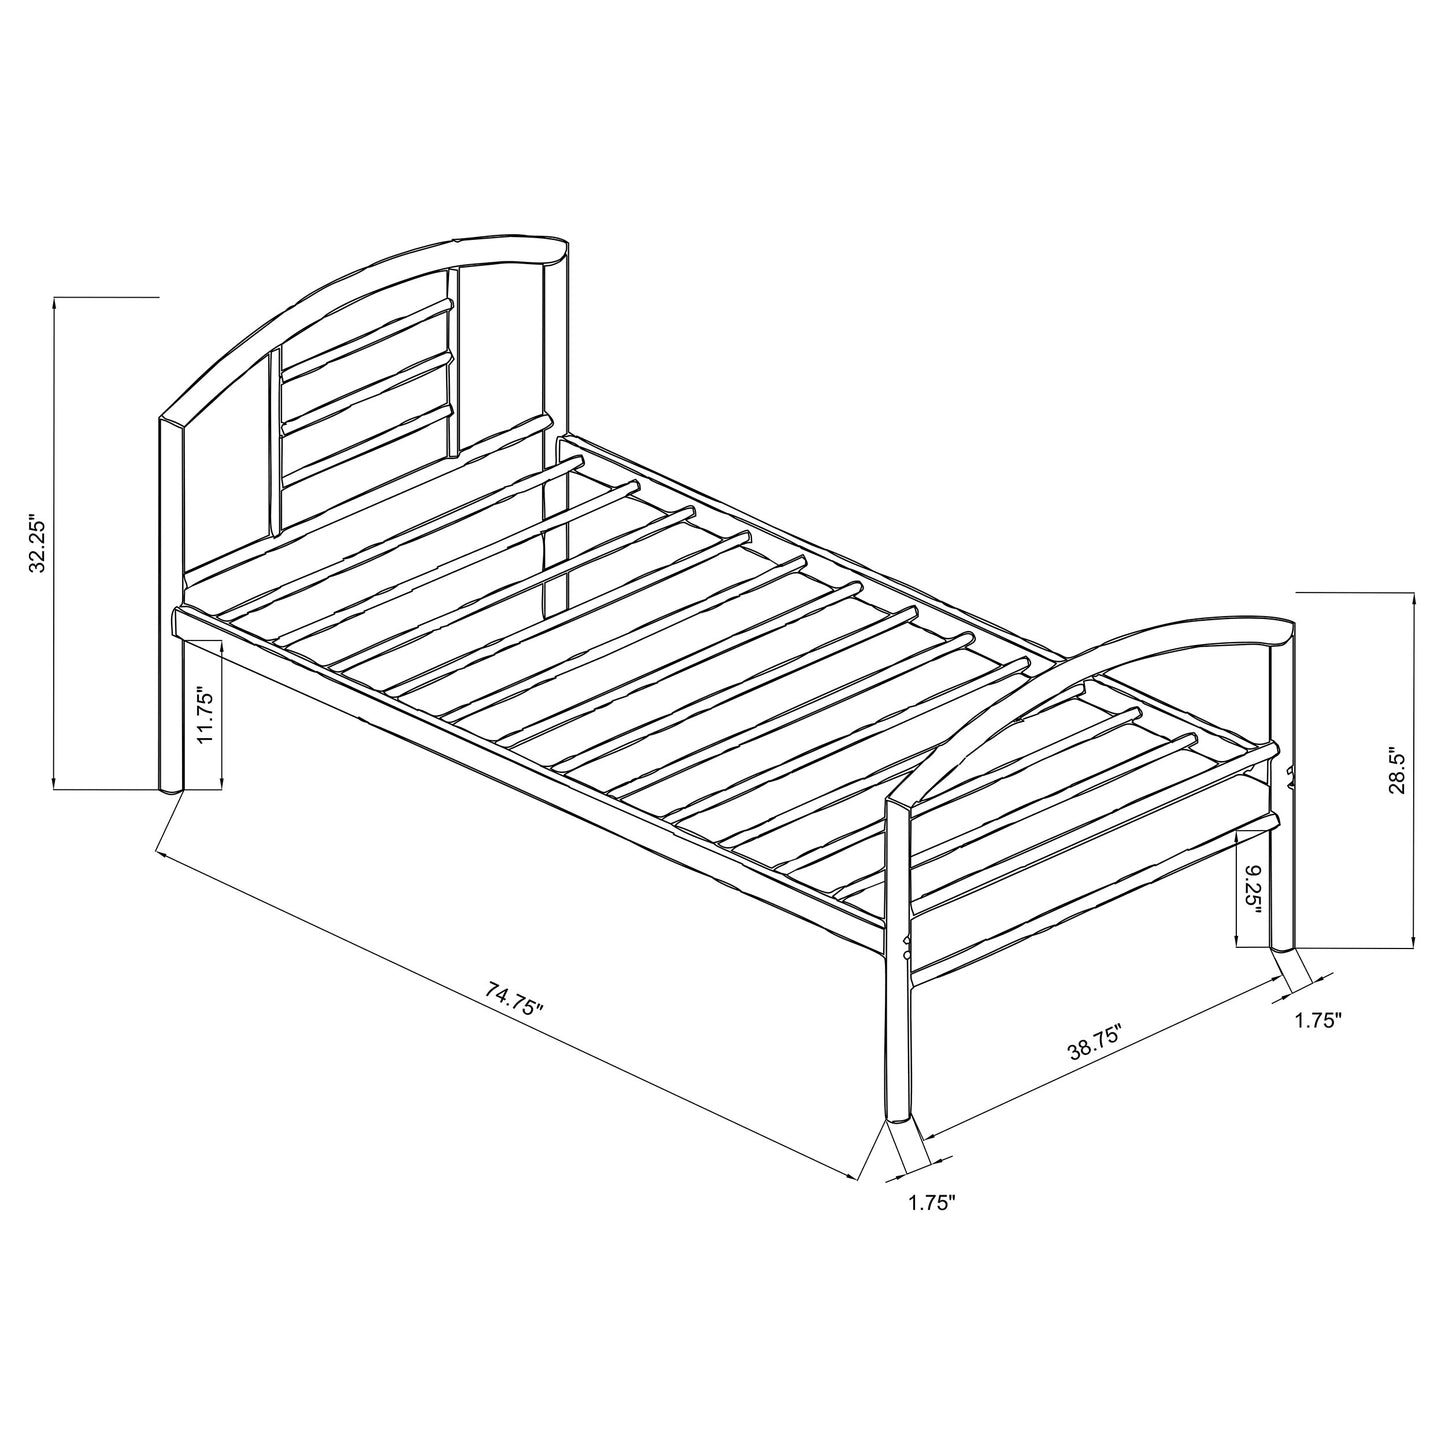 Baines Metal Twin Open Frame Bed Silver